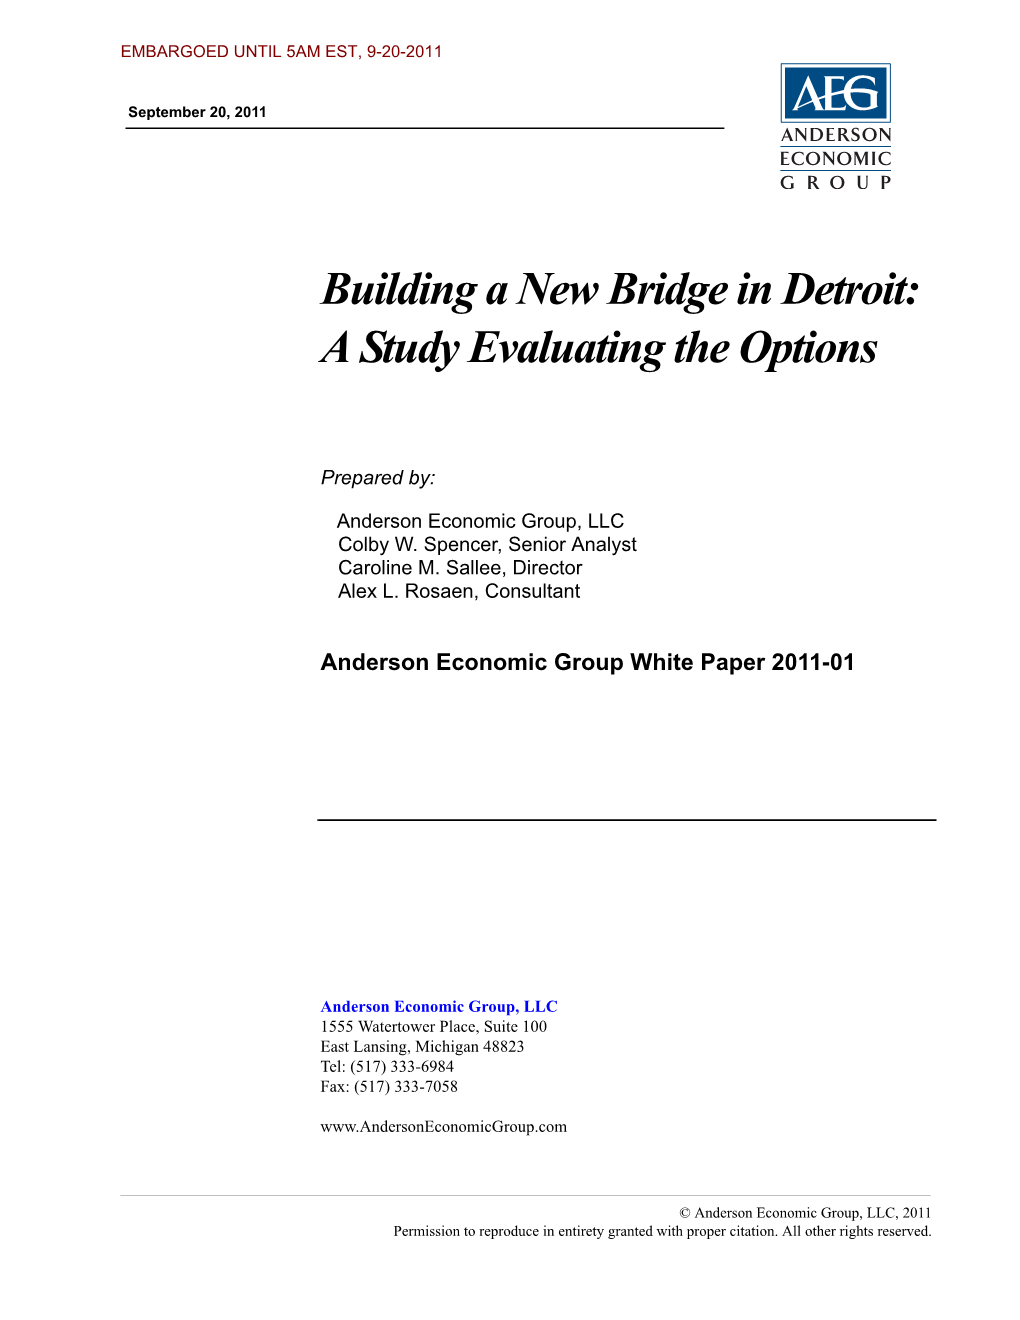 Building a New Bridge in Detroit: a Study Evaluating the Options